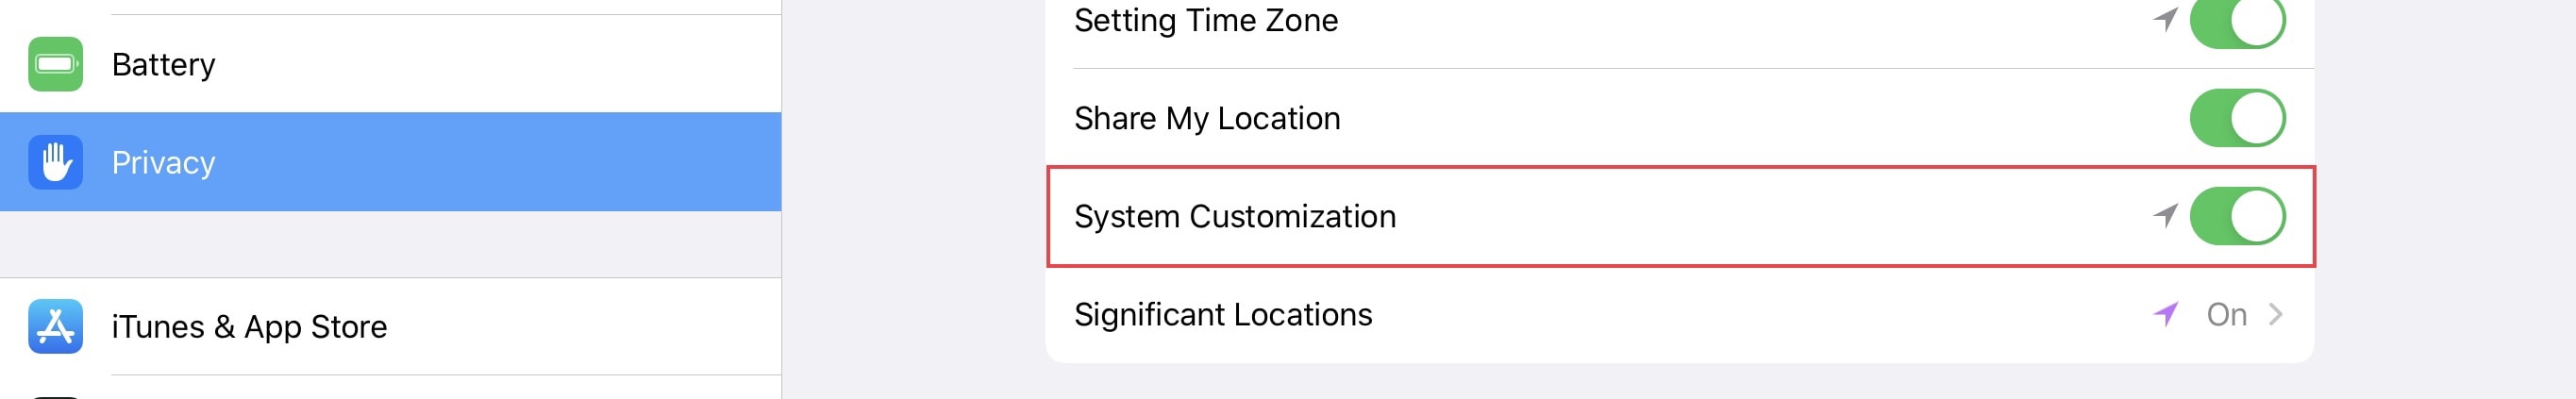 Fix Dark Mode, Night Shift scheduling on iPhone and iPad